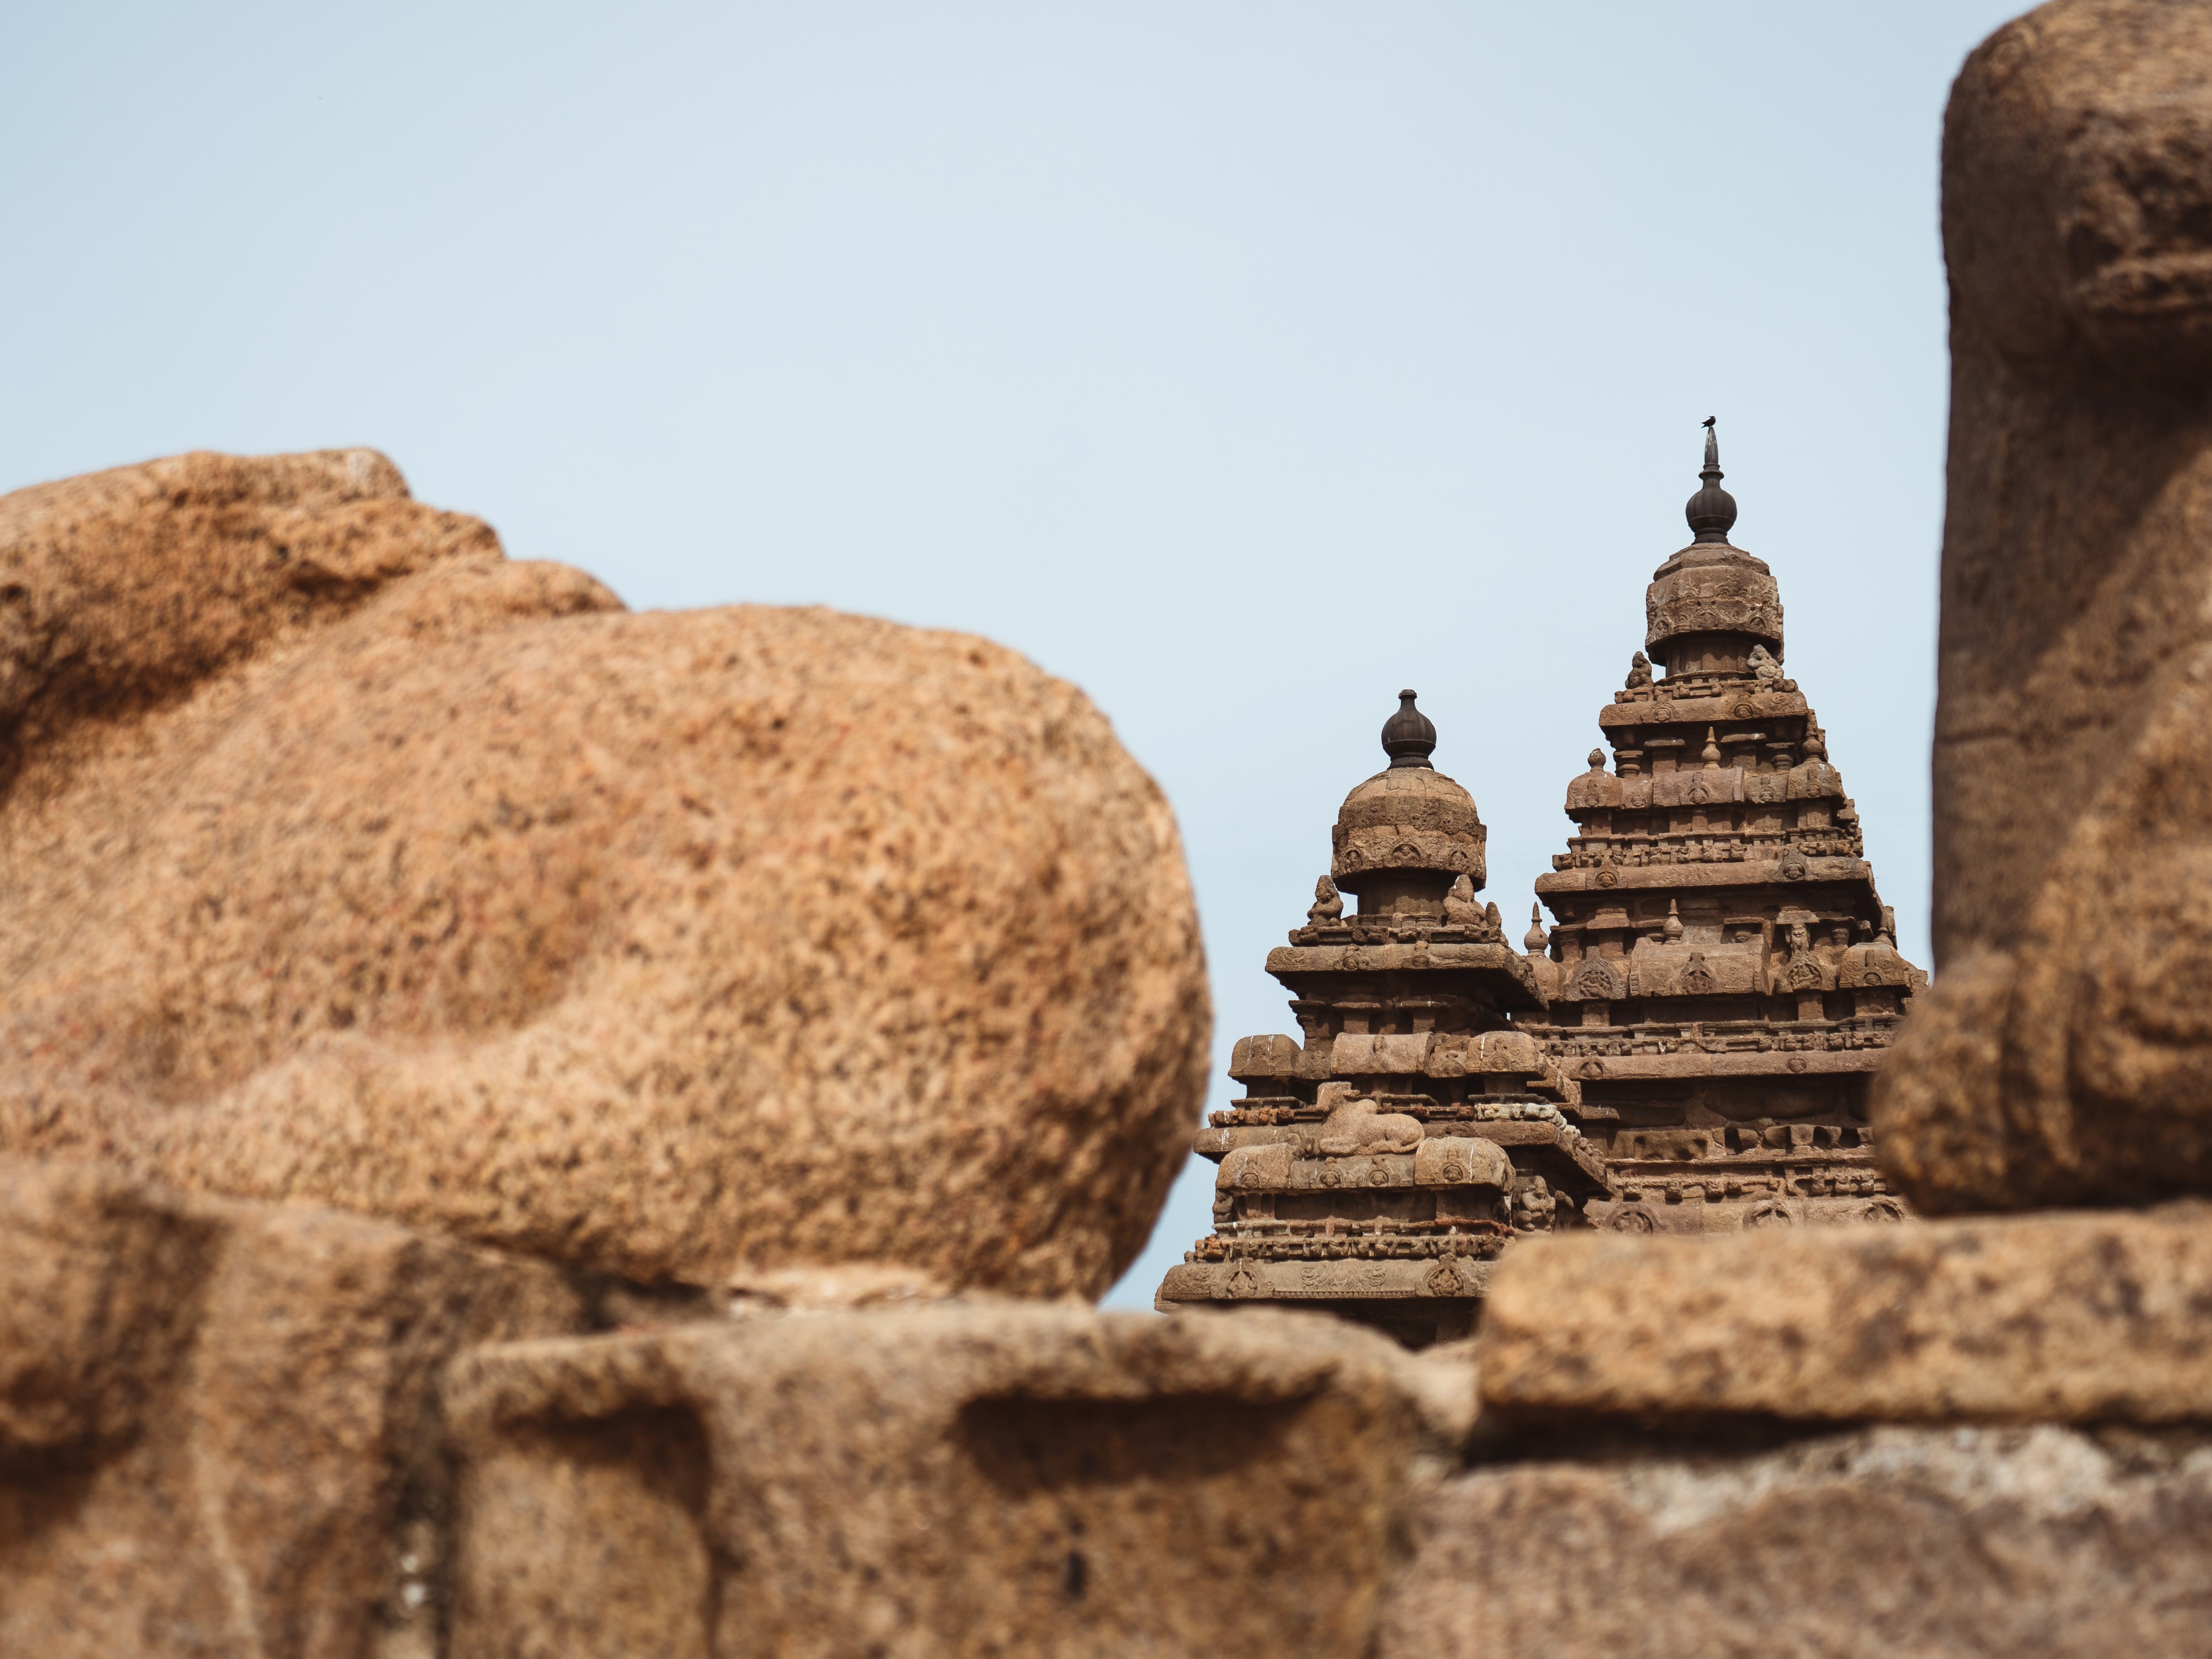 The rooftops of two Hindu temples